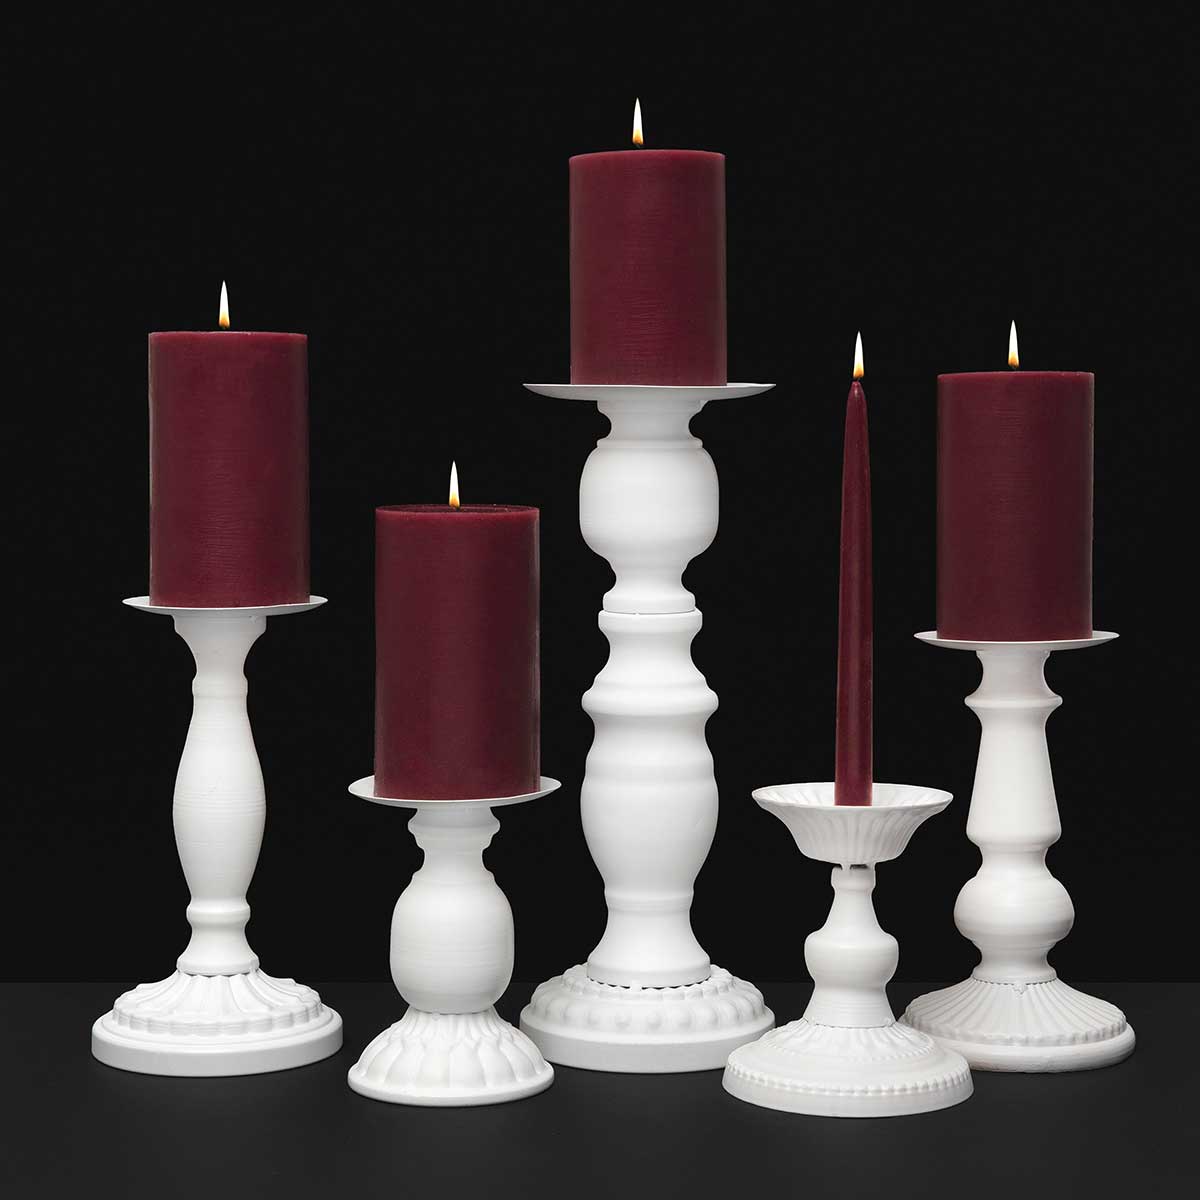 CANDLEHOLDER MEDIUM 4.5IN X 8IN MATTE WHITE METAL - Click Image to Close